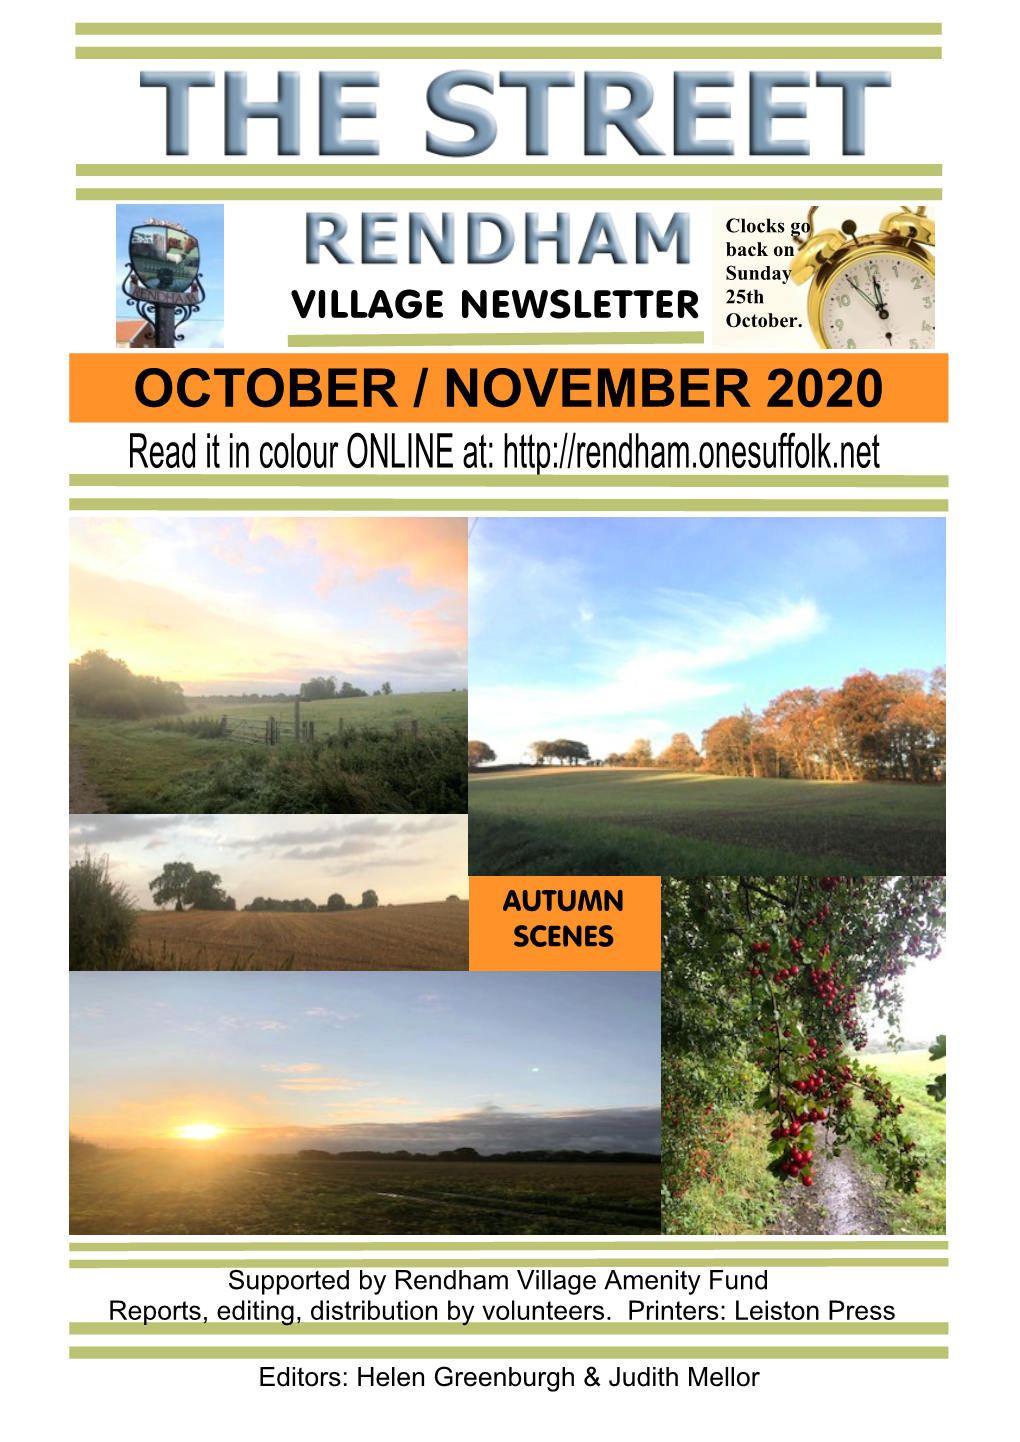 OCTOBER / NOVEMBER 2020 Read It in Colour ONLINE At